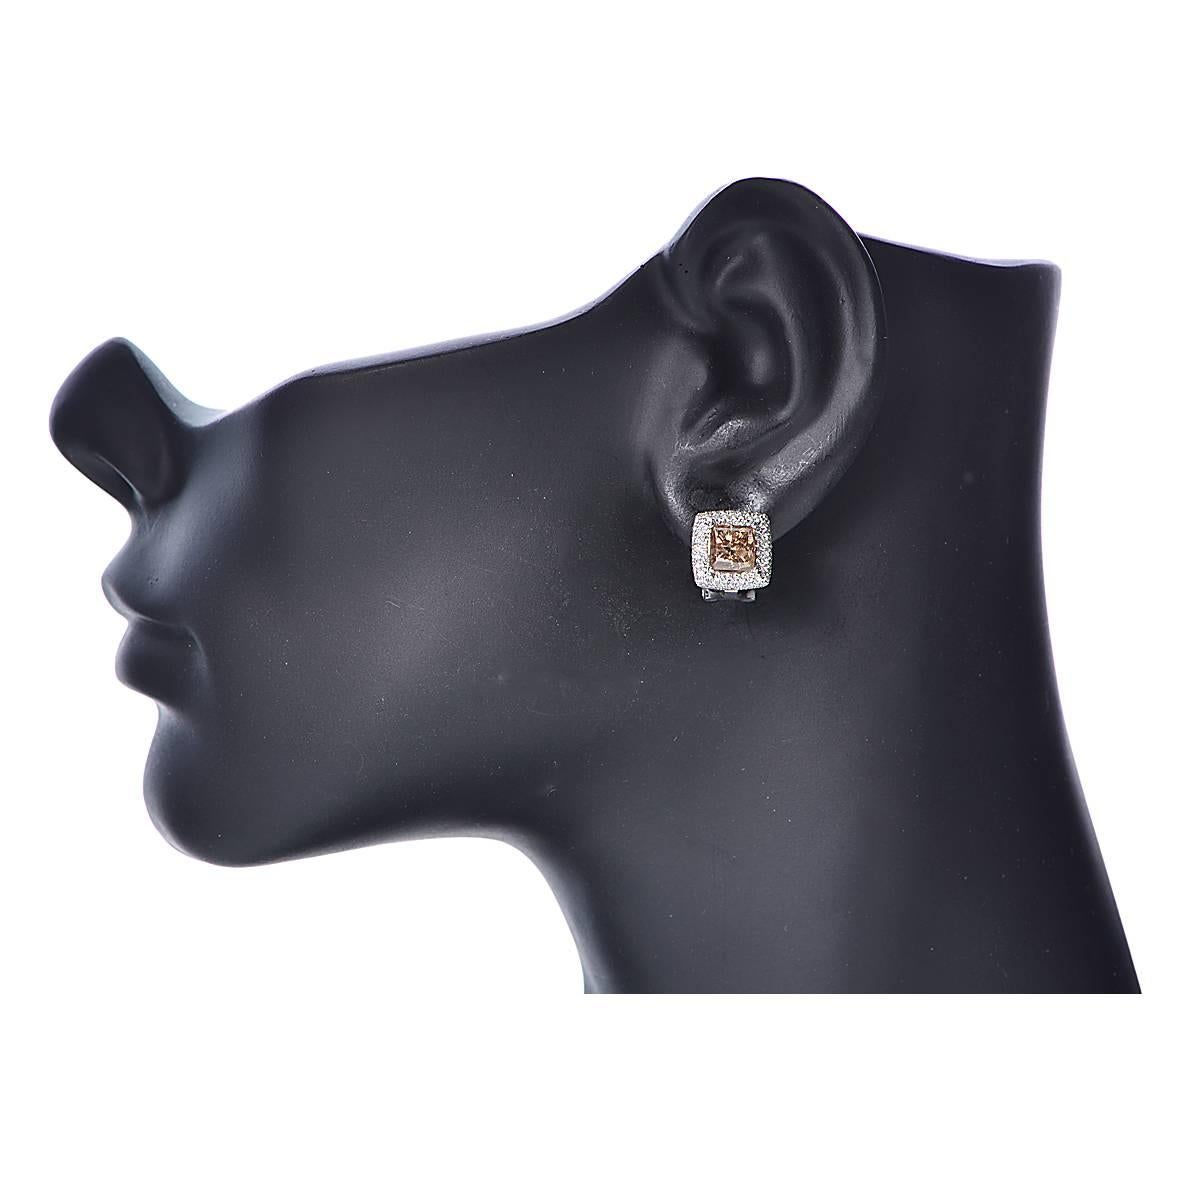 18 Karat White Gold and Diamond Earrings Featuring 2 Princess Cut Brown Diamonds Weighing Approximately 3.79cts, SI2 Clarity, Accented by 168 Round Brilliant Cut Diamonds Weighing Approximately .70cts. Total Diamond Weight is 4.49cts.